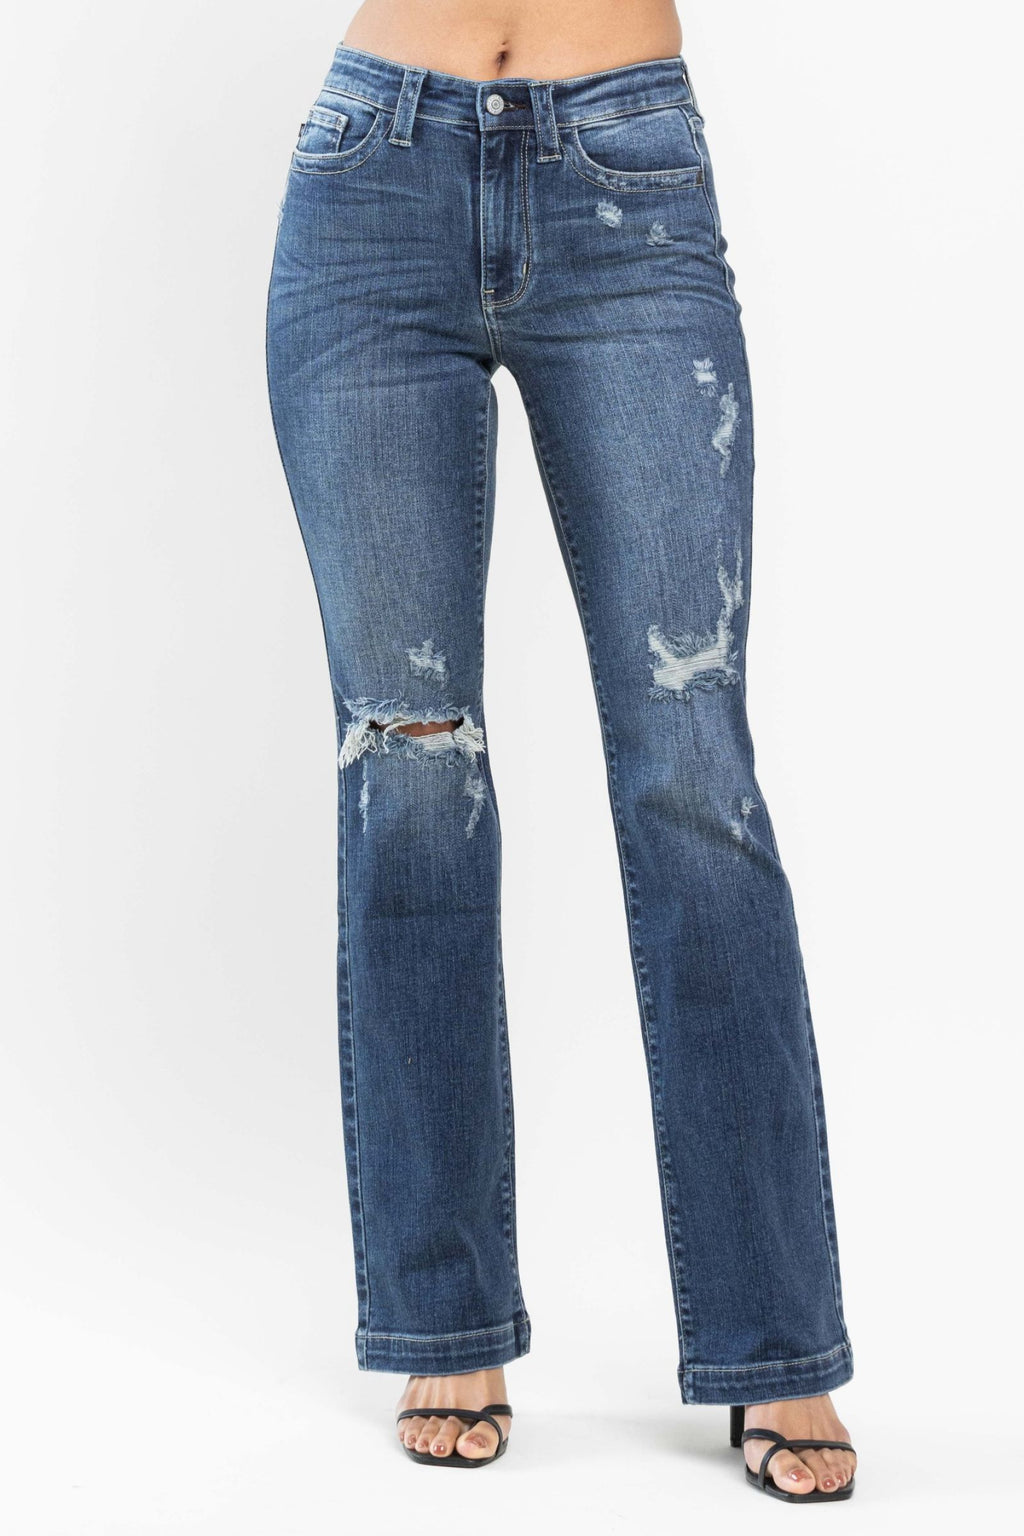 Judy Blue Mid Rise Hand Sand & Destroy Bootcut Jeans